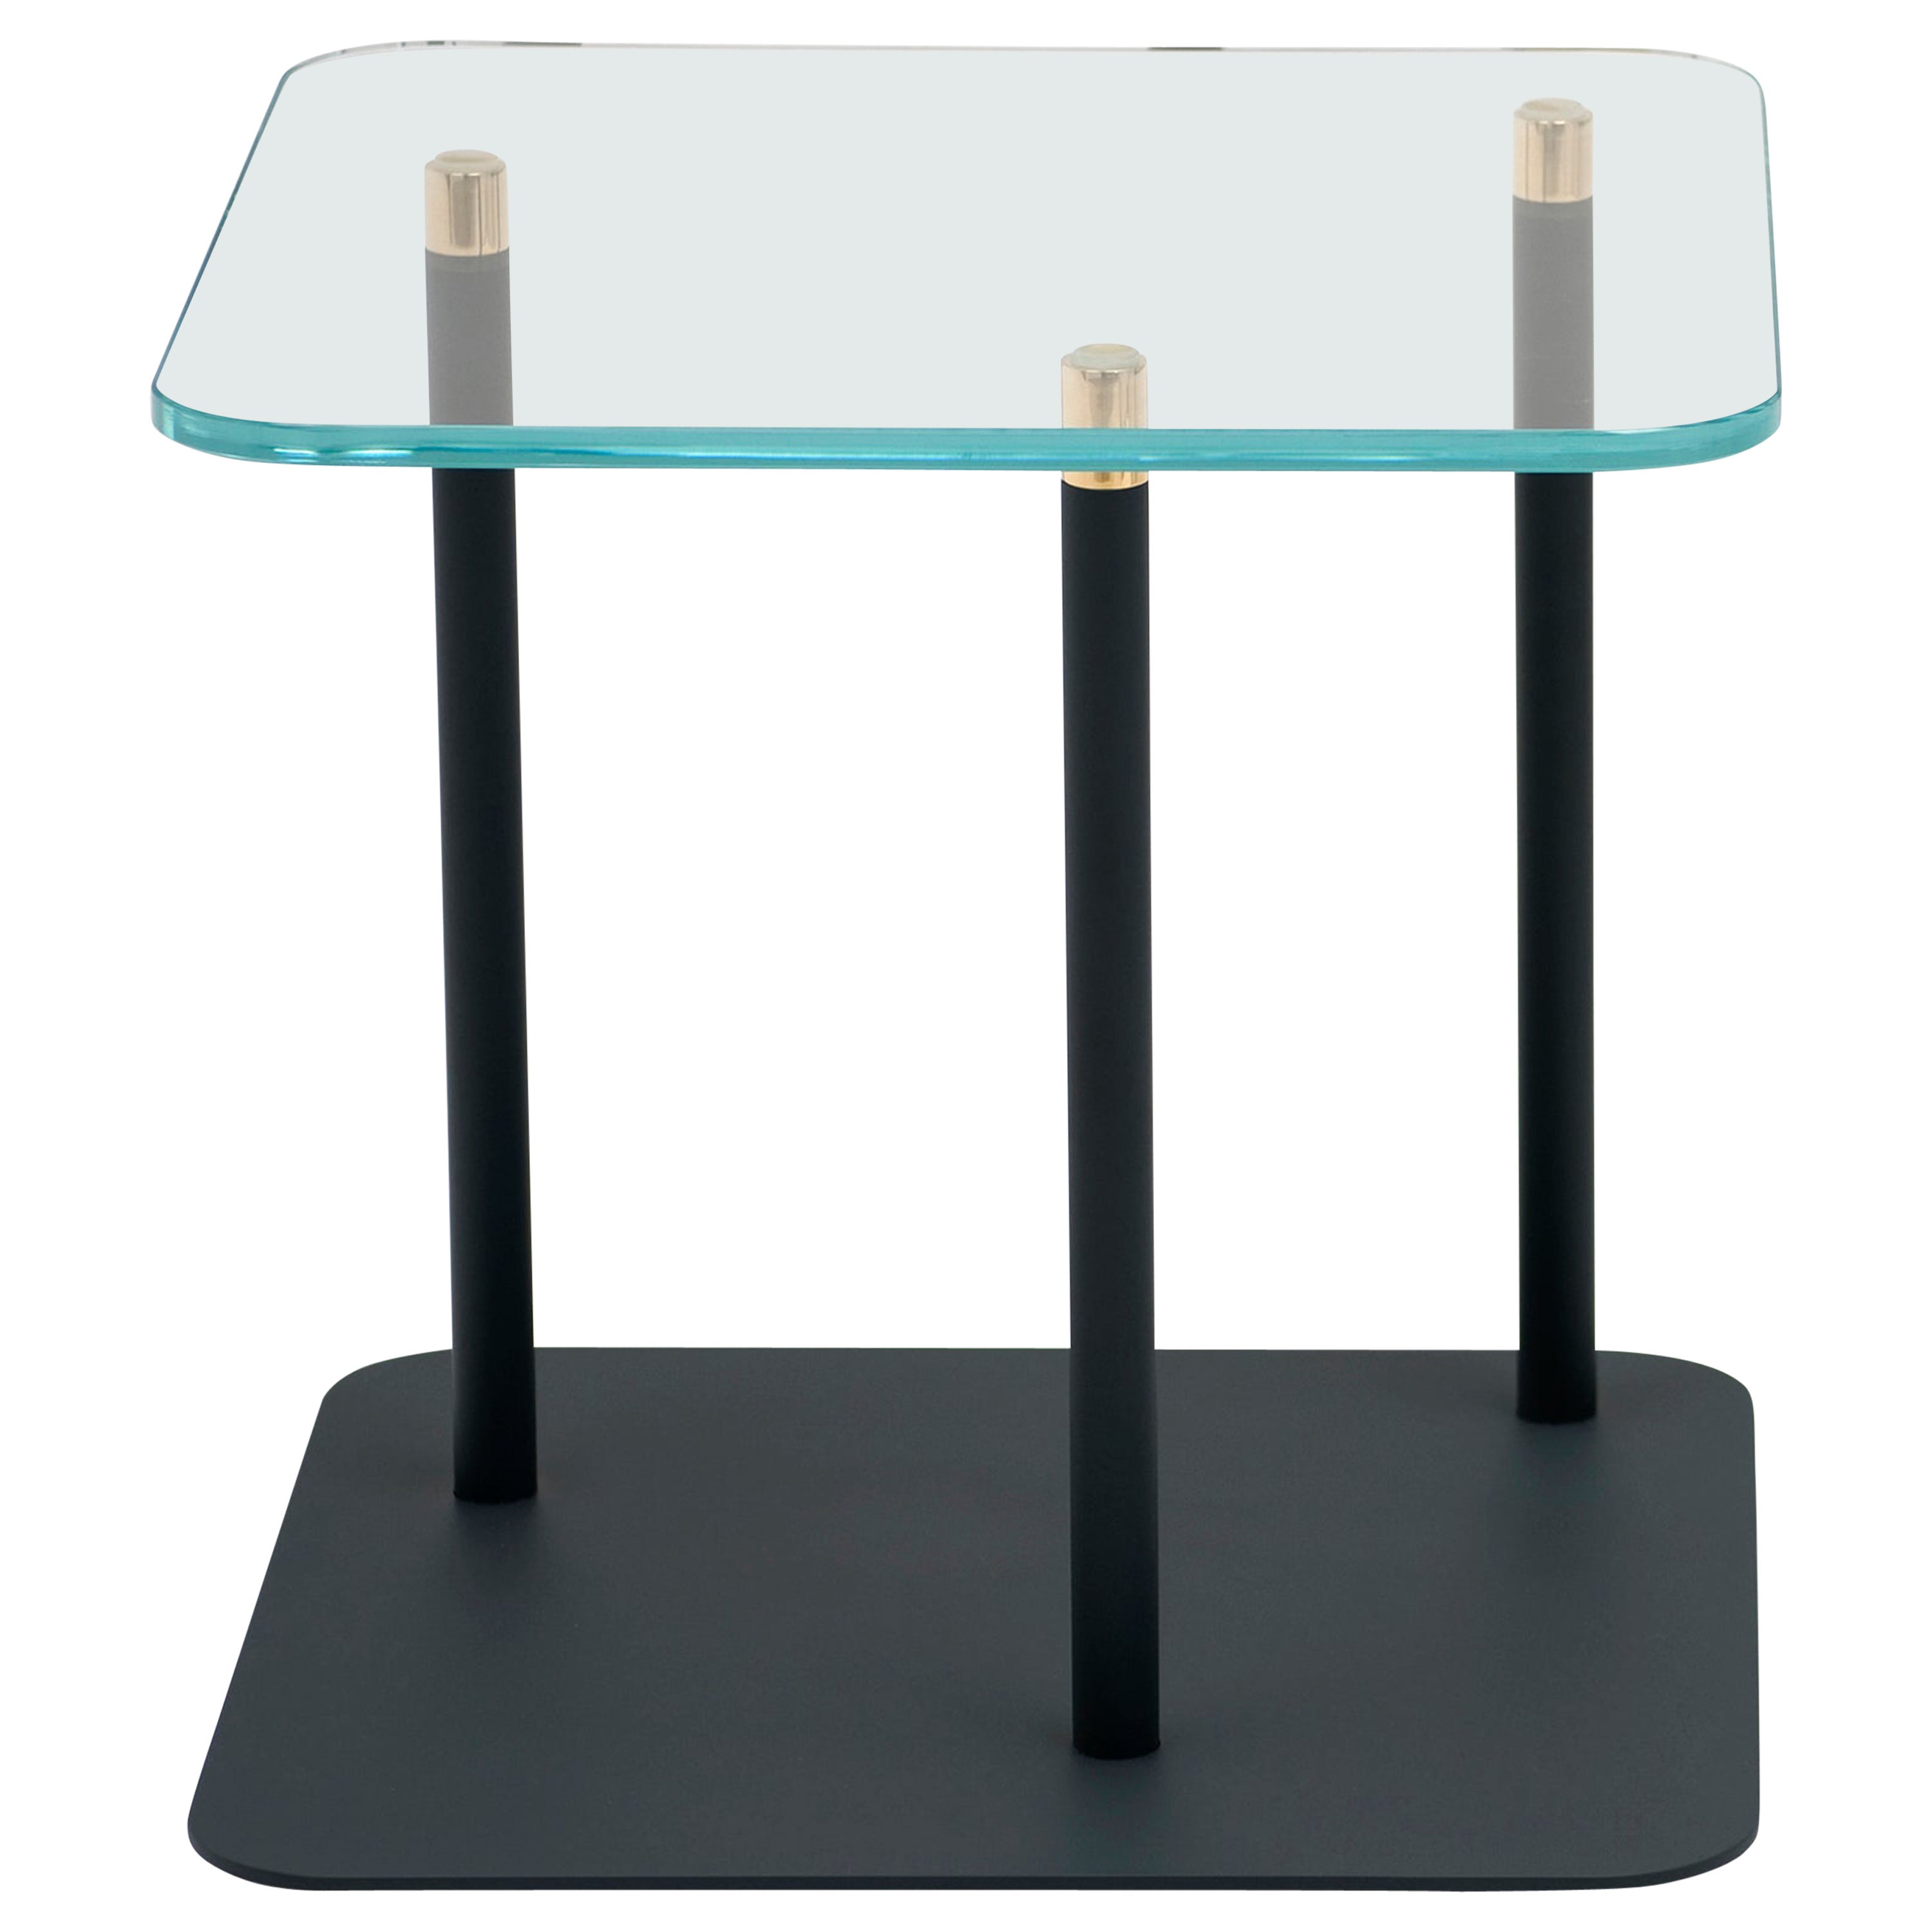 Points of Interest Side Table by Phase Design